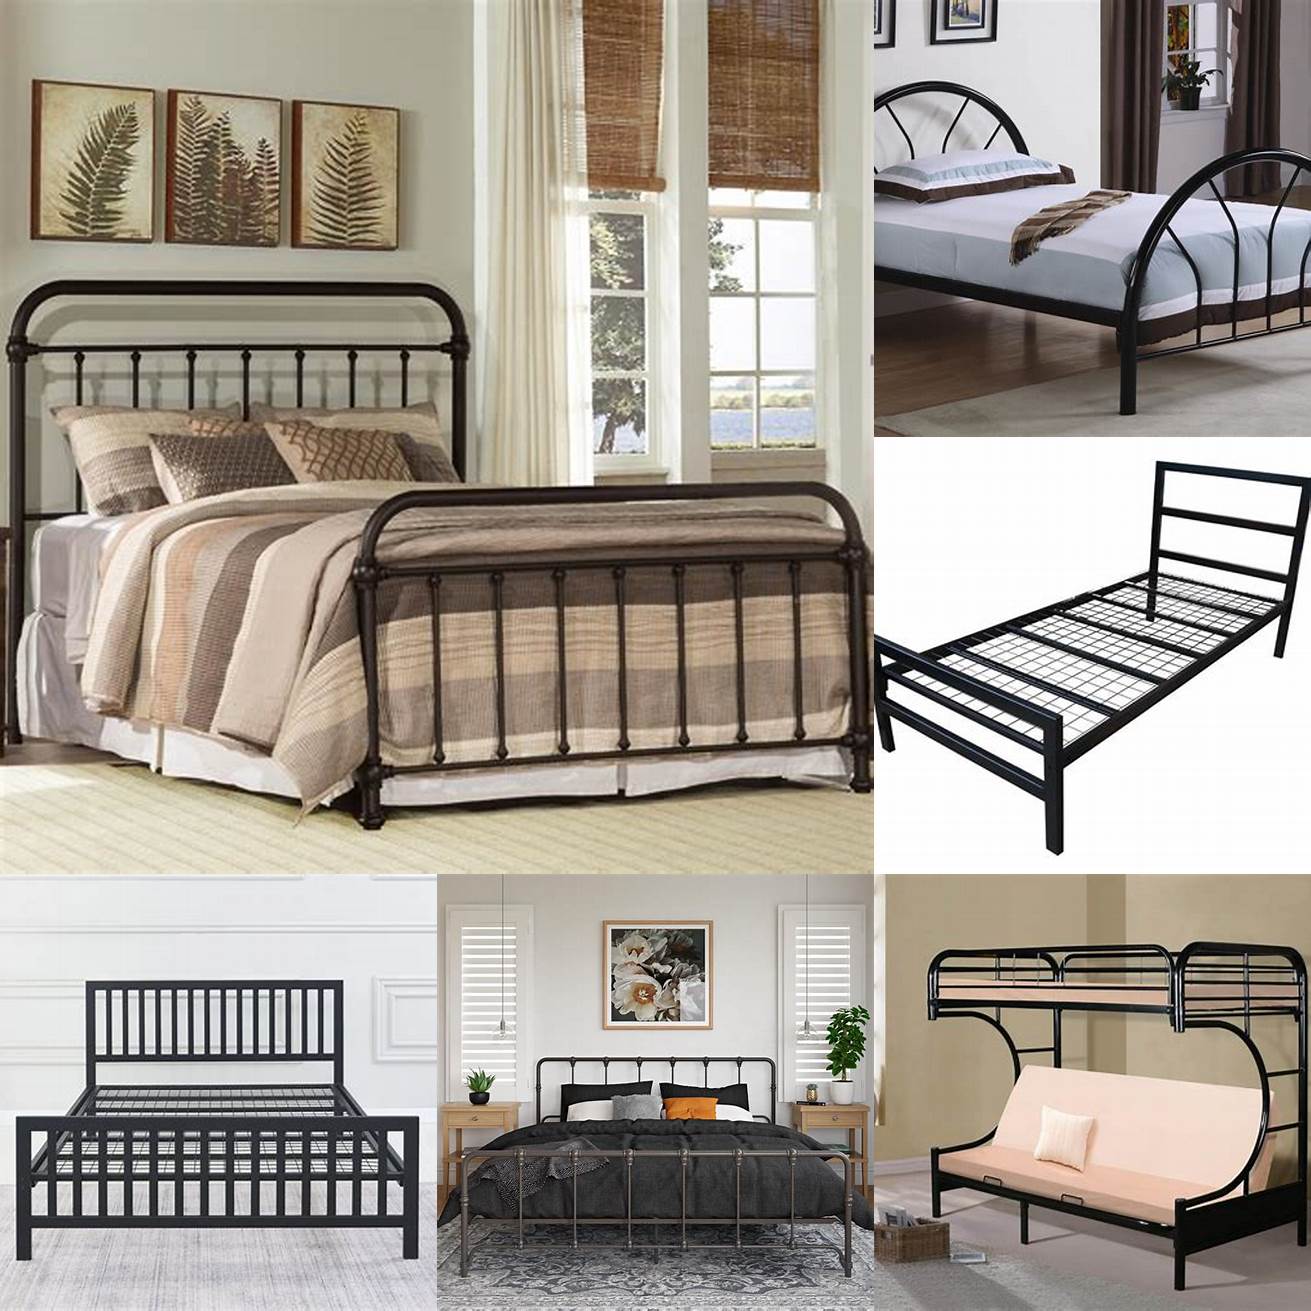 Aluminum Aluminum is a lightweight option for metal beds Its also strong and durable and can be molded into a variety of shapes and styles